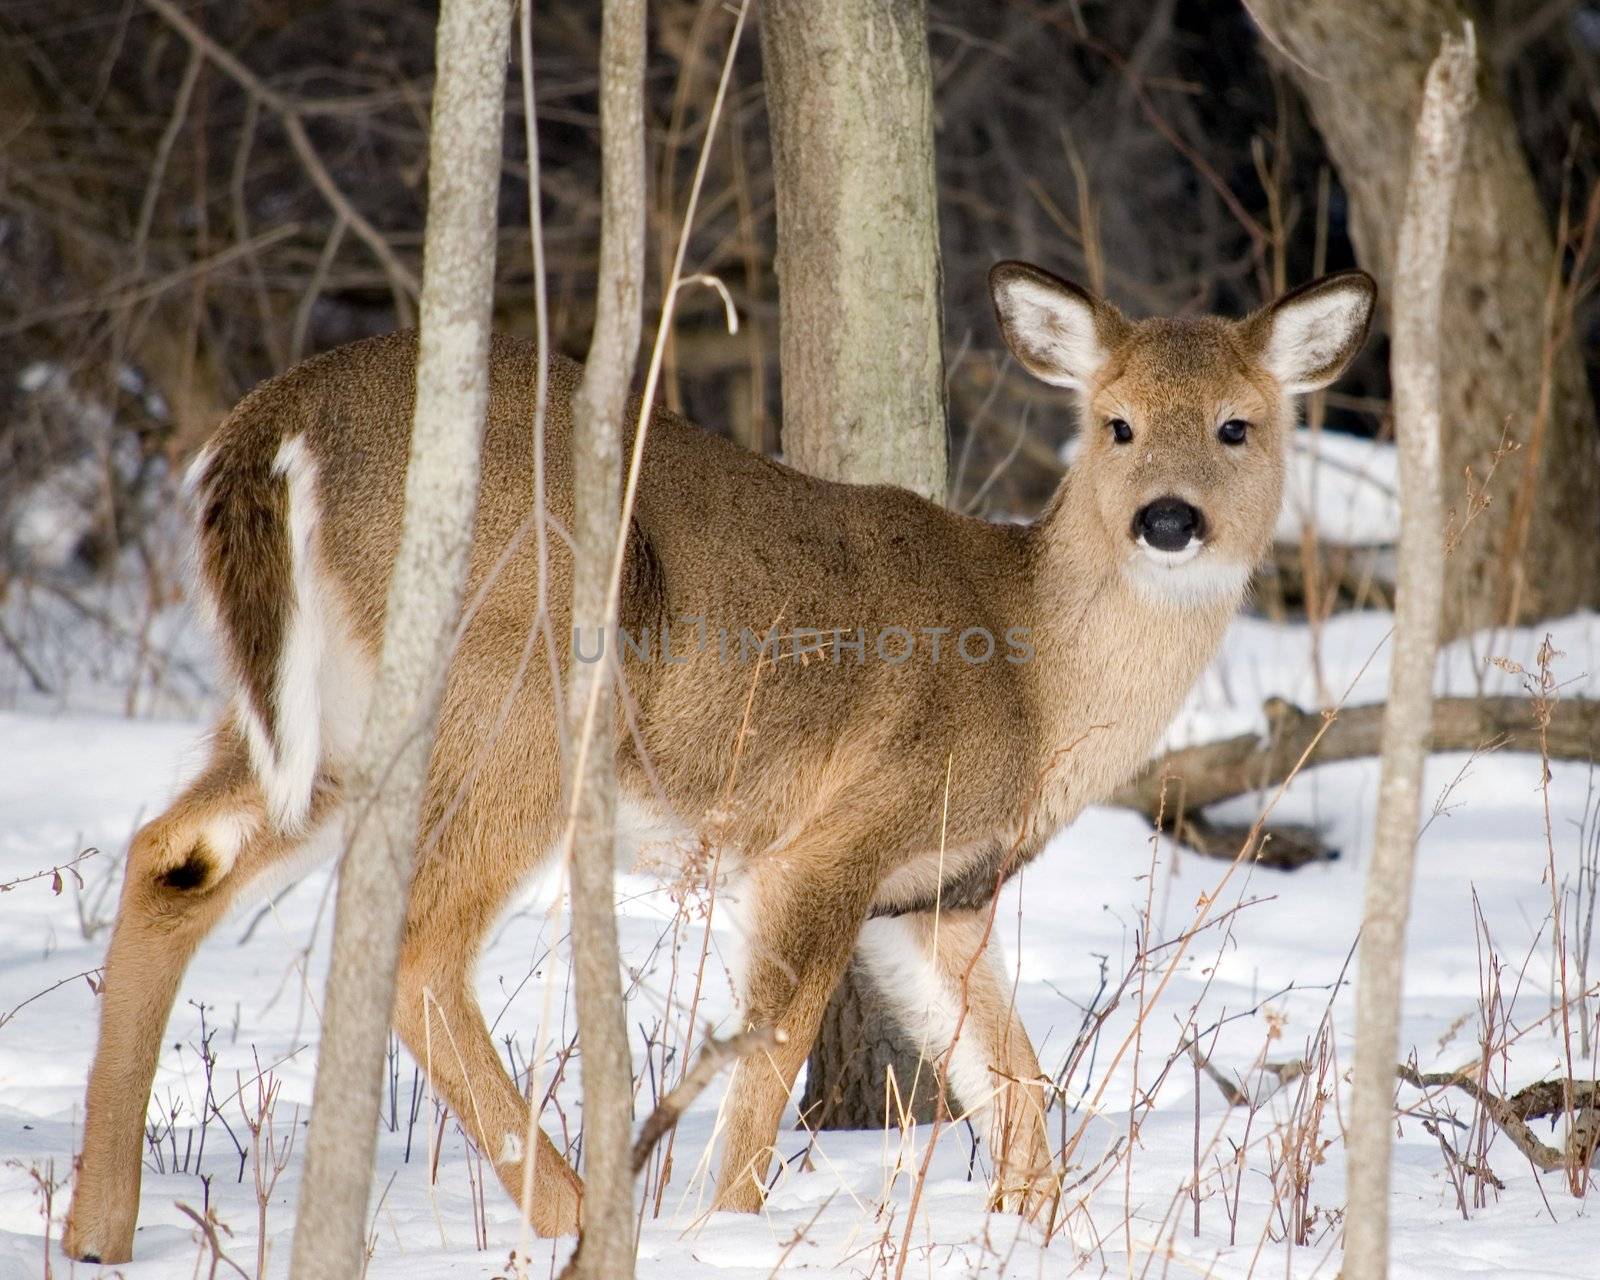 Whitetail deer yearling at the woods edge in winter snow.